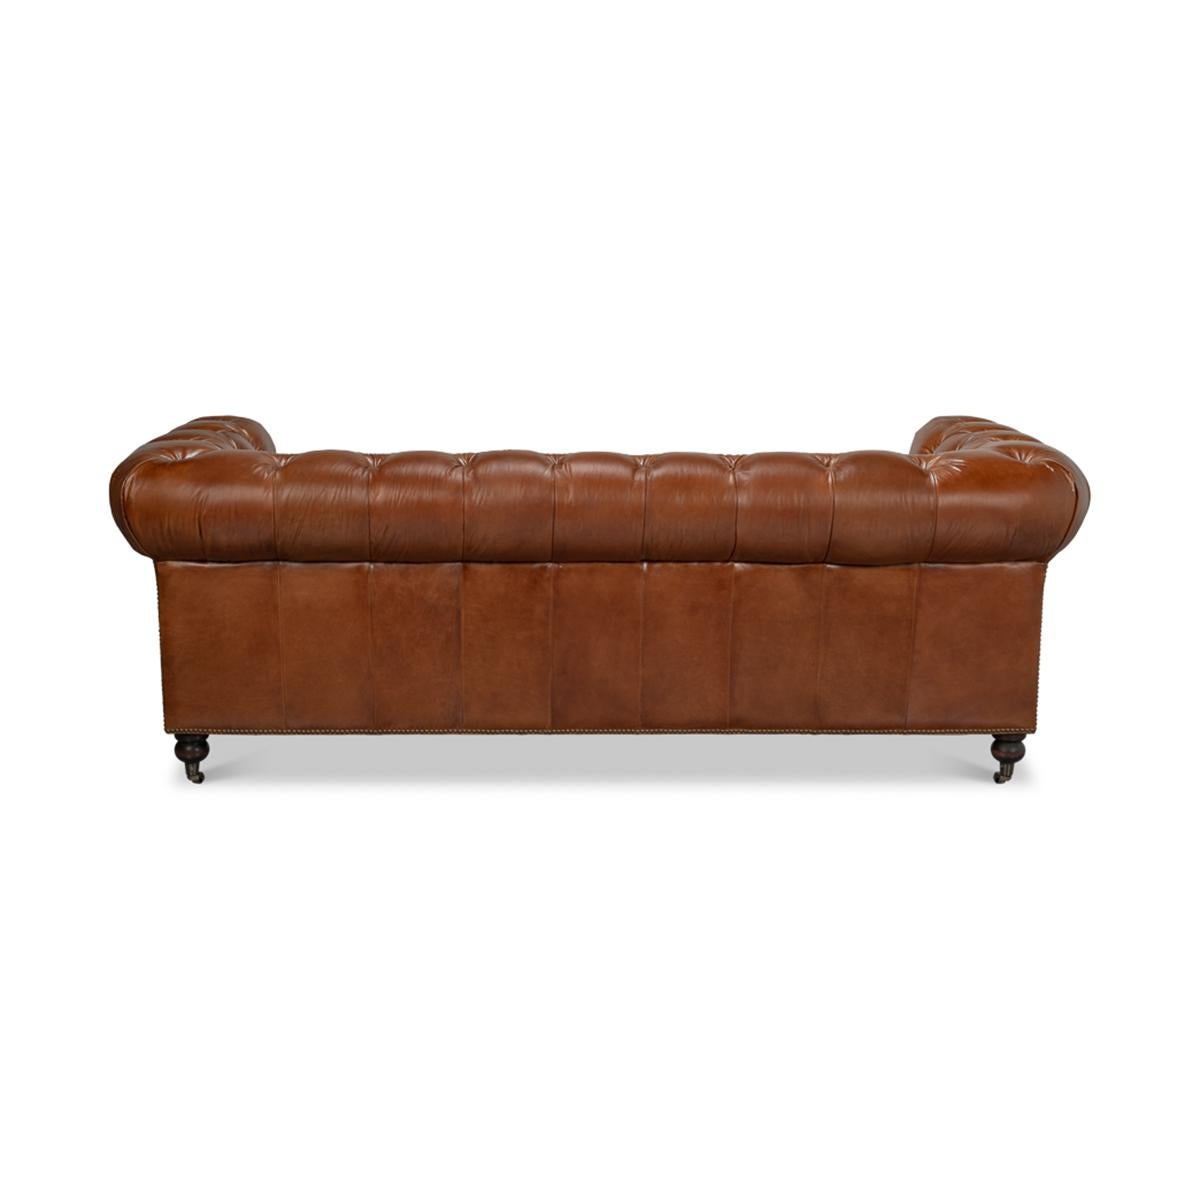 Asian Vintage Style Classic Chesterfield Sofa For Sale